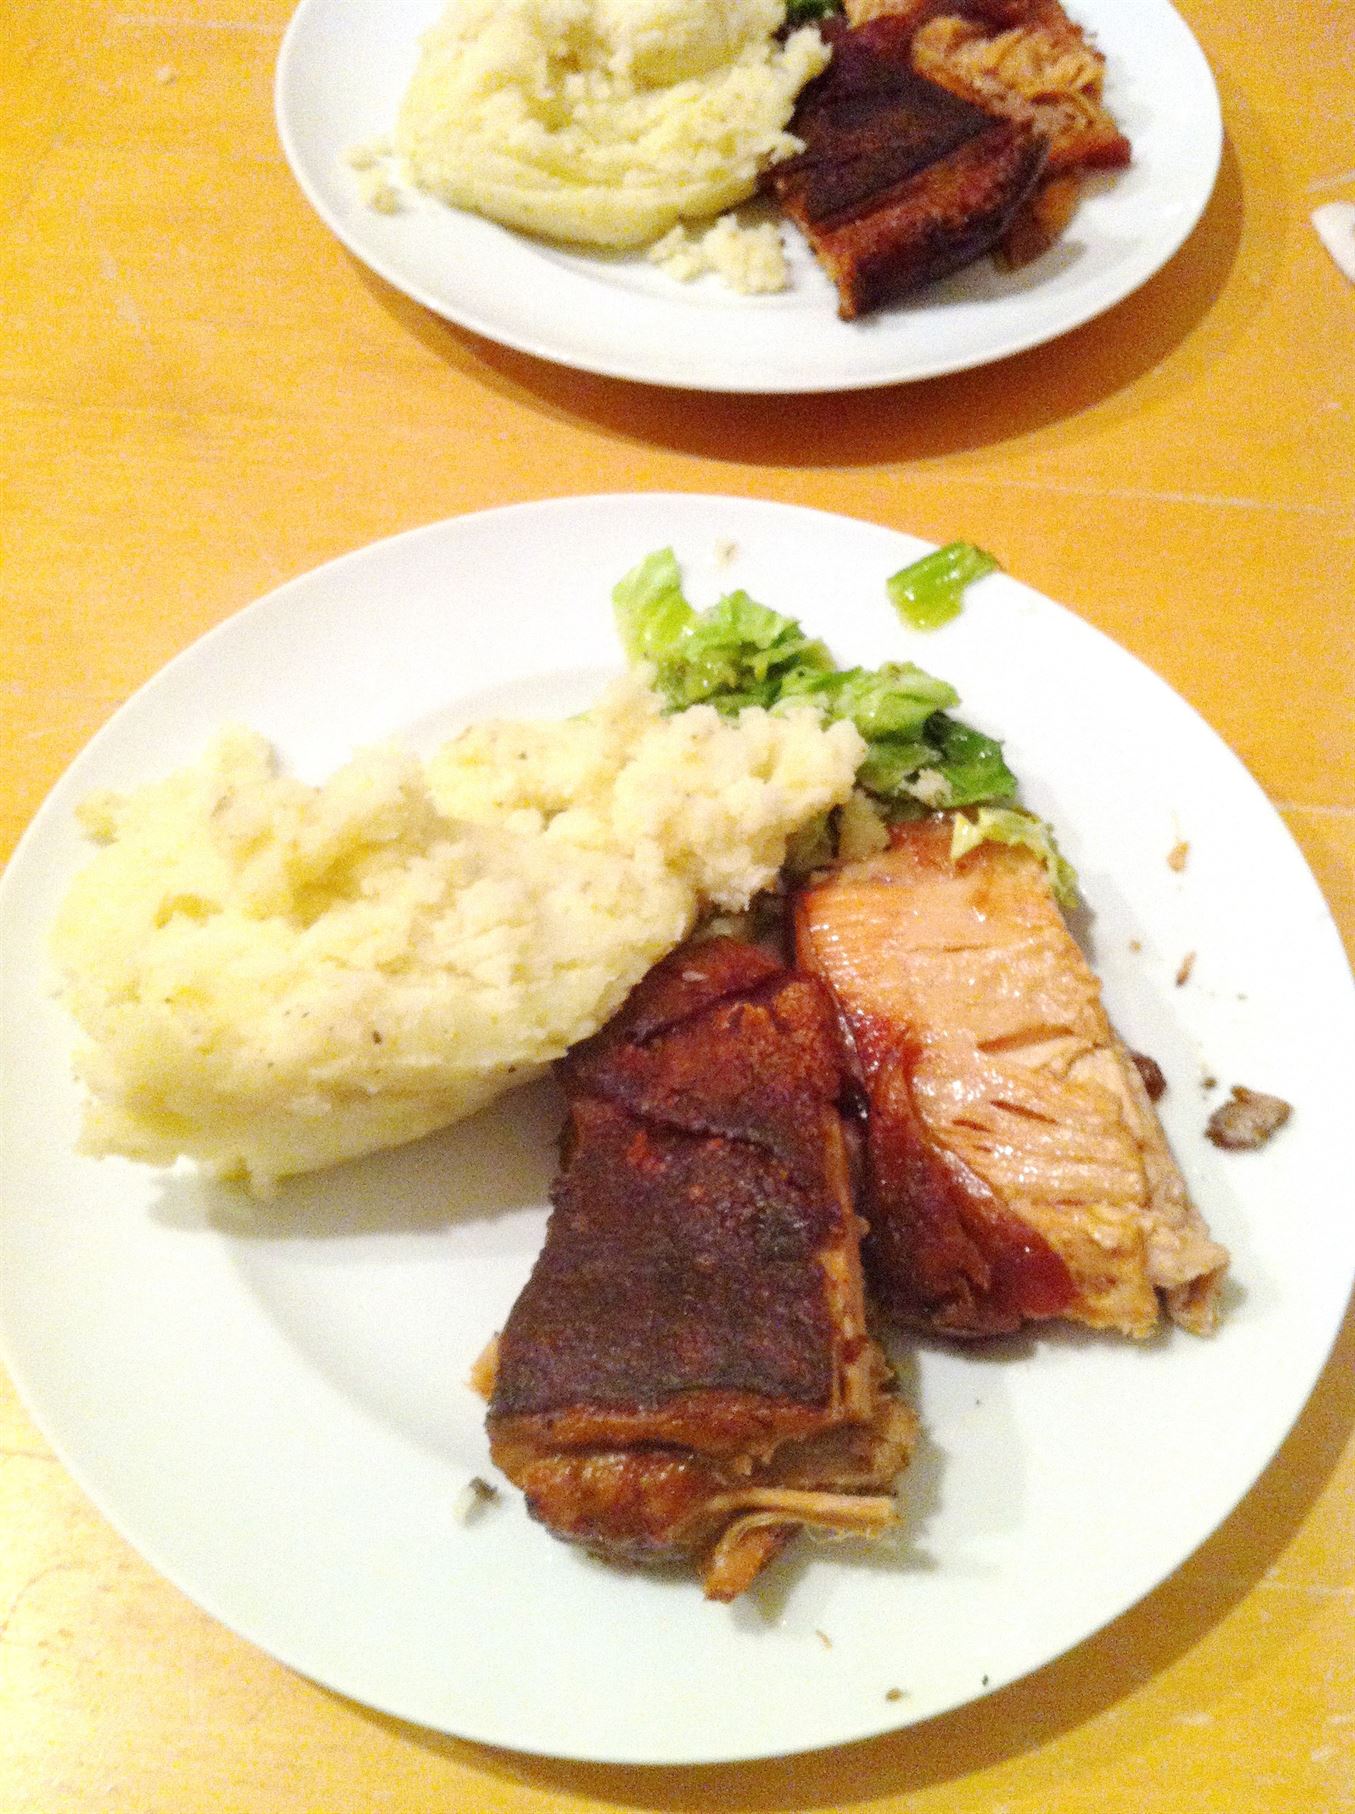 Blackened Crispy Pork Belly with Mash and Buttered Cabbage, Lay The Table